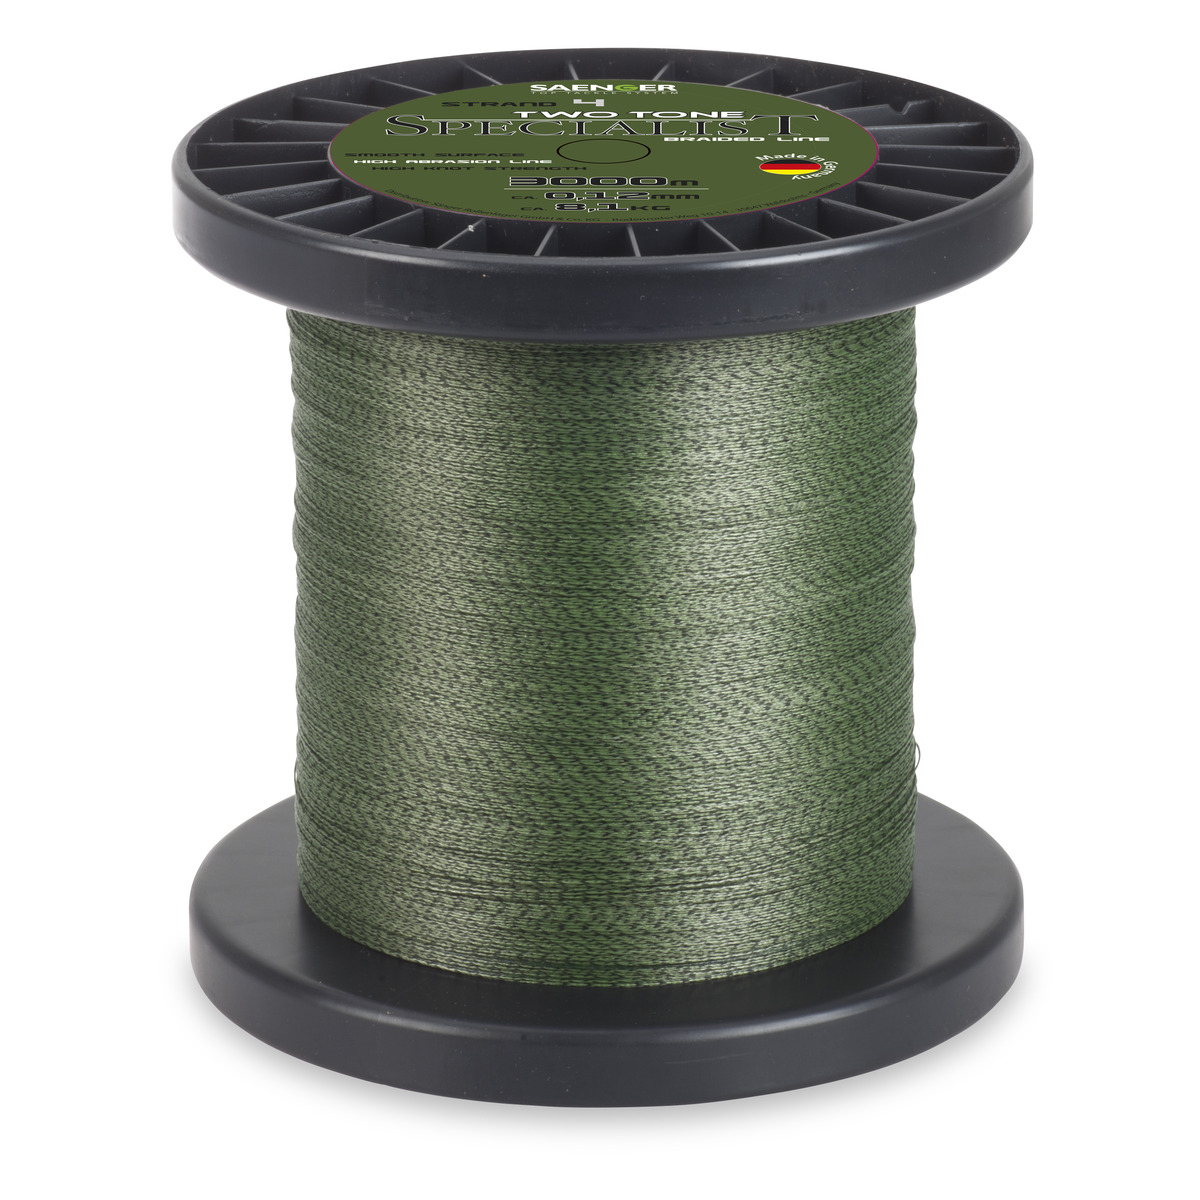 Saenger Specialist Two Tone Camou Braid - 0,30 mm - 25,5kg 3000 m